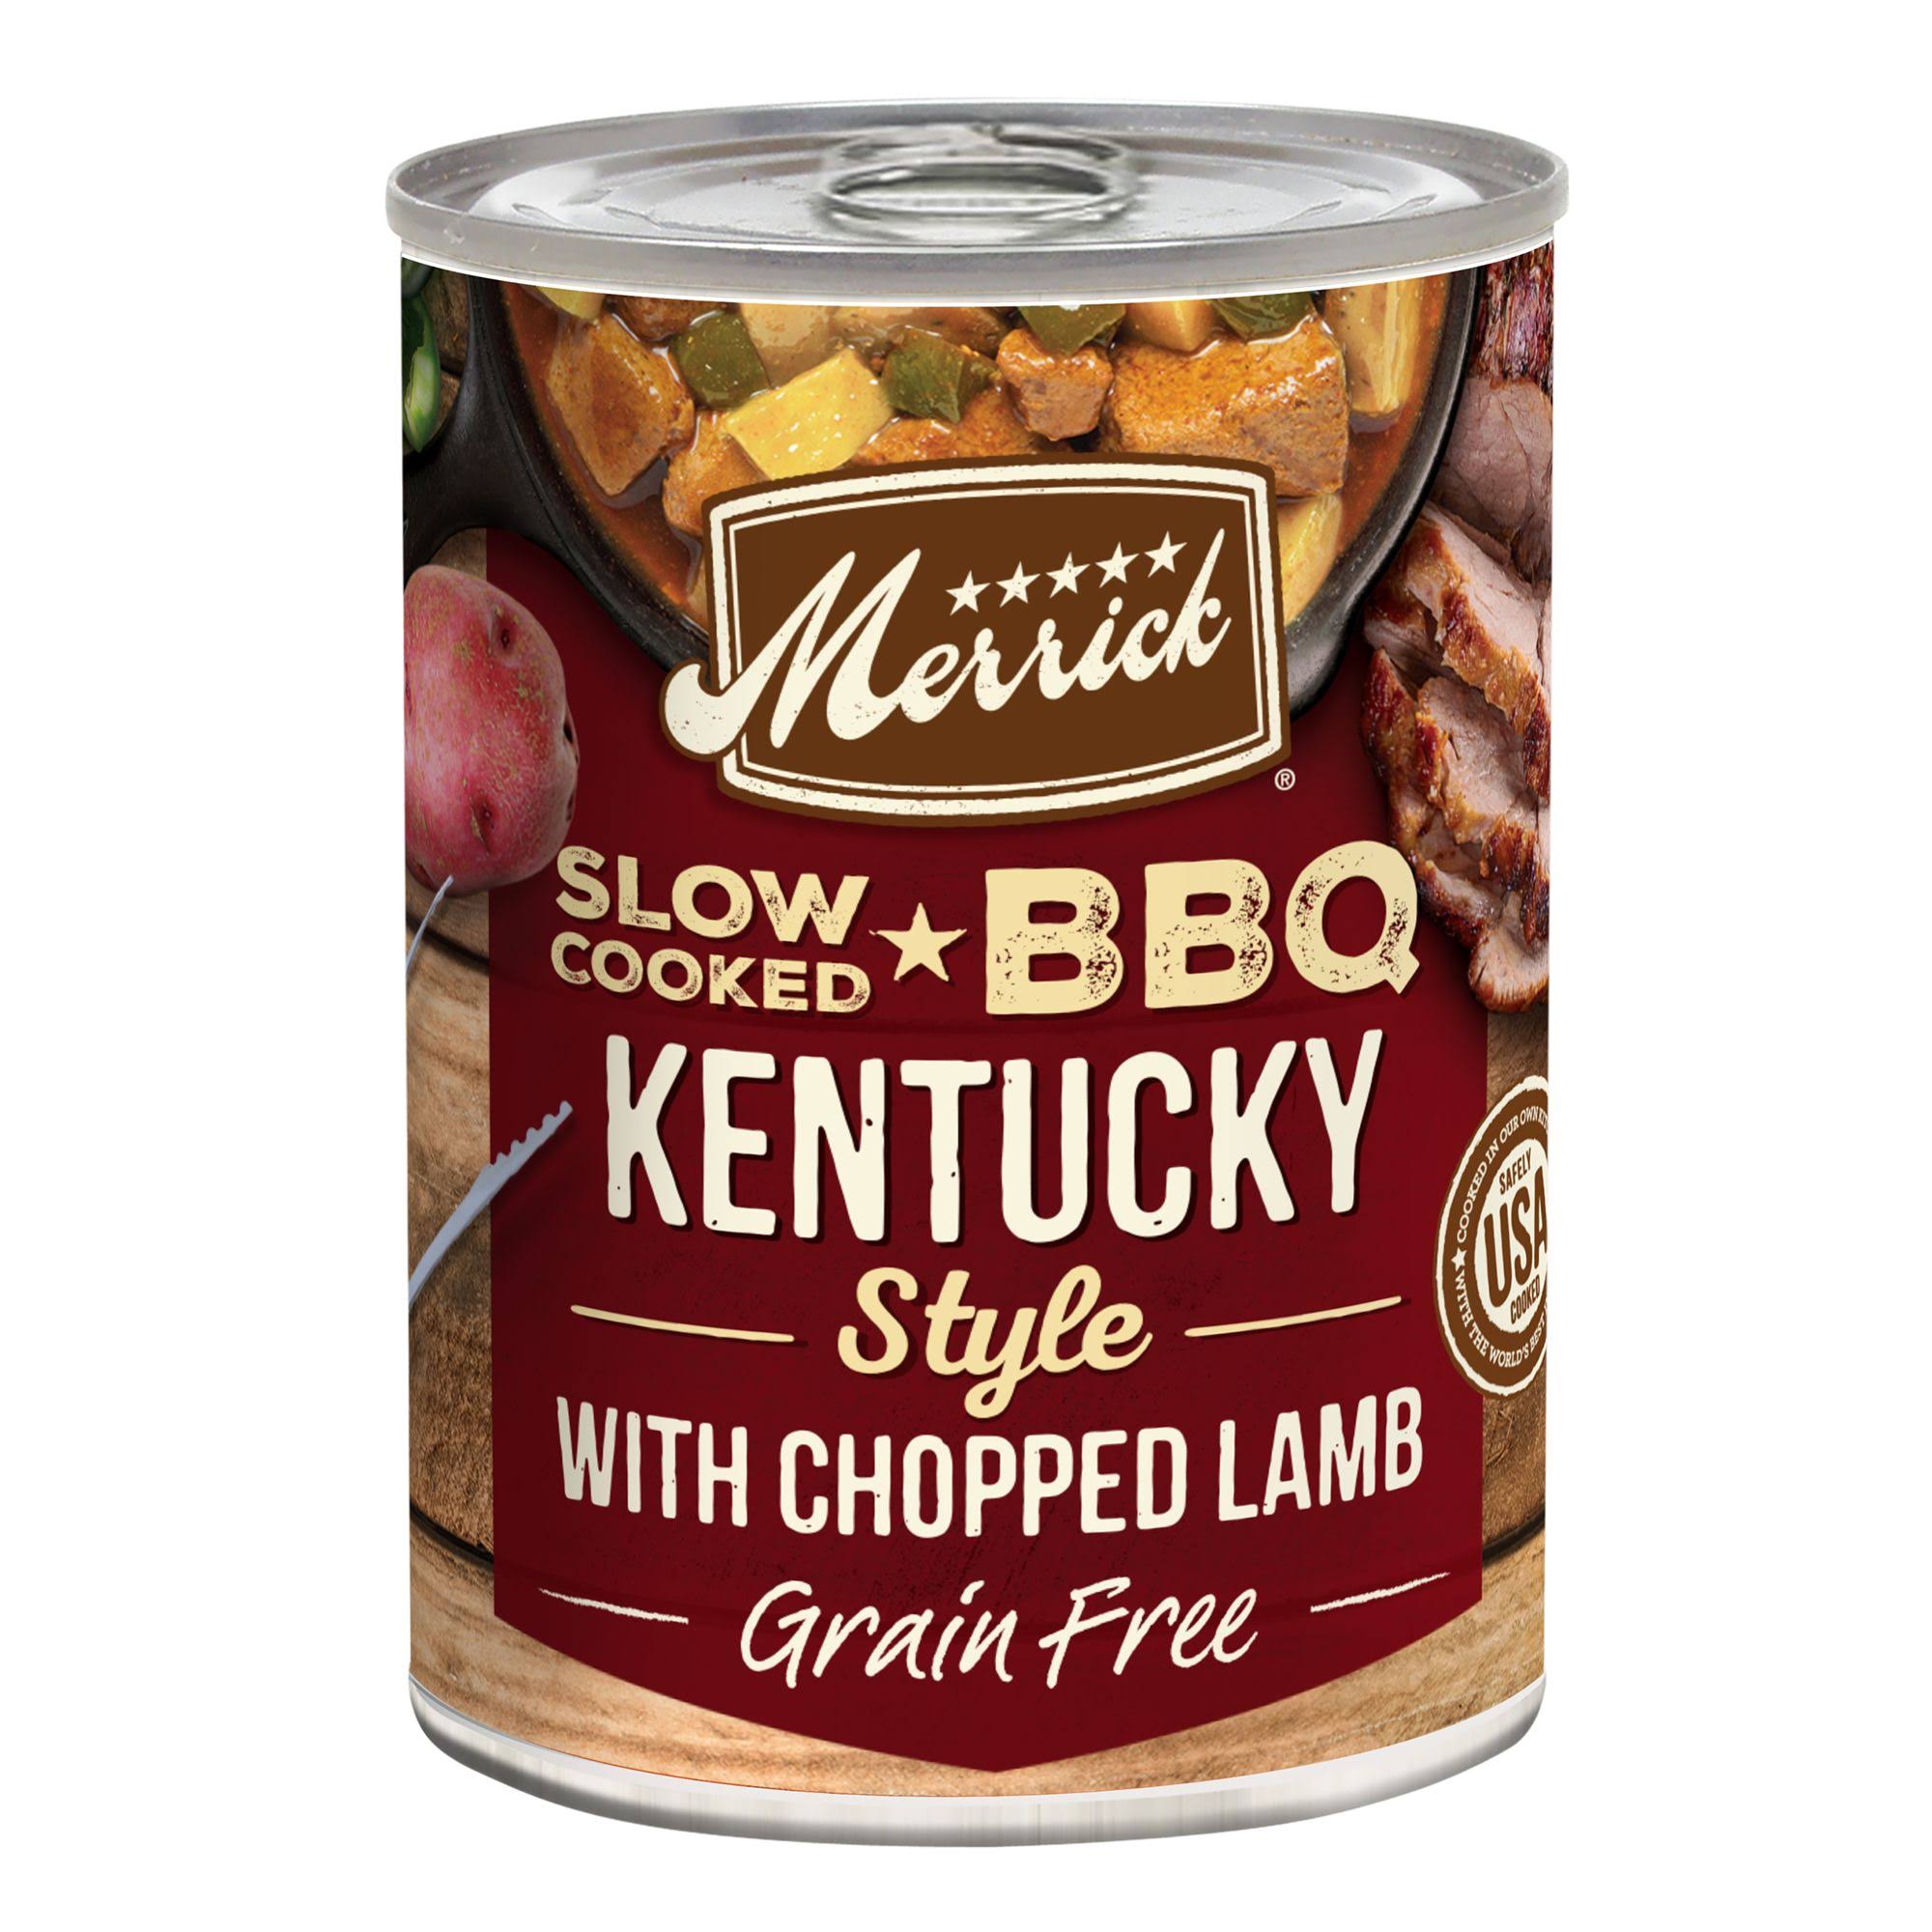 Merrick Slow-Cooked BBQ Kentucky Style With Chopped Lamb Grain-Free Canned Dog Food